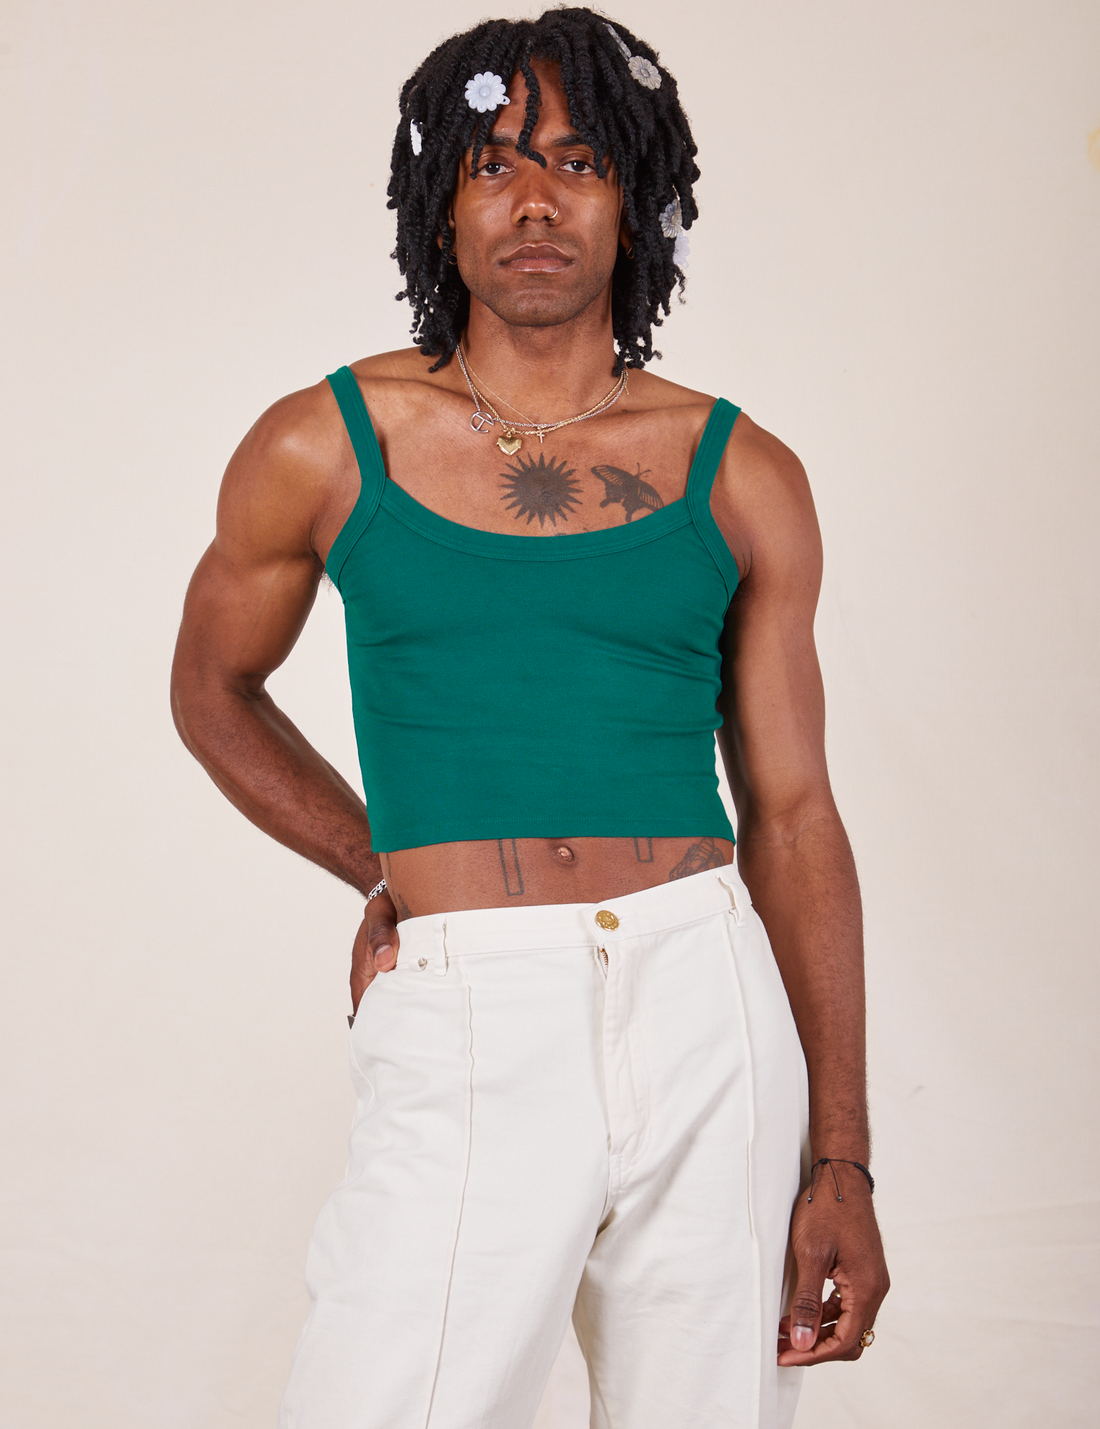 Jerrod is 6'3" and wearing S Cropped Cami in Hunter Green paired with vintage off-white Western Pants